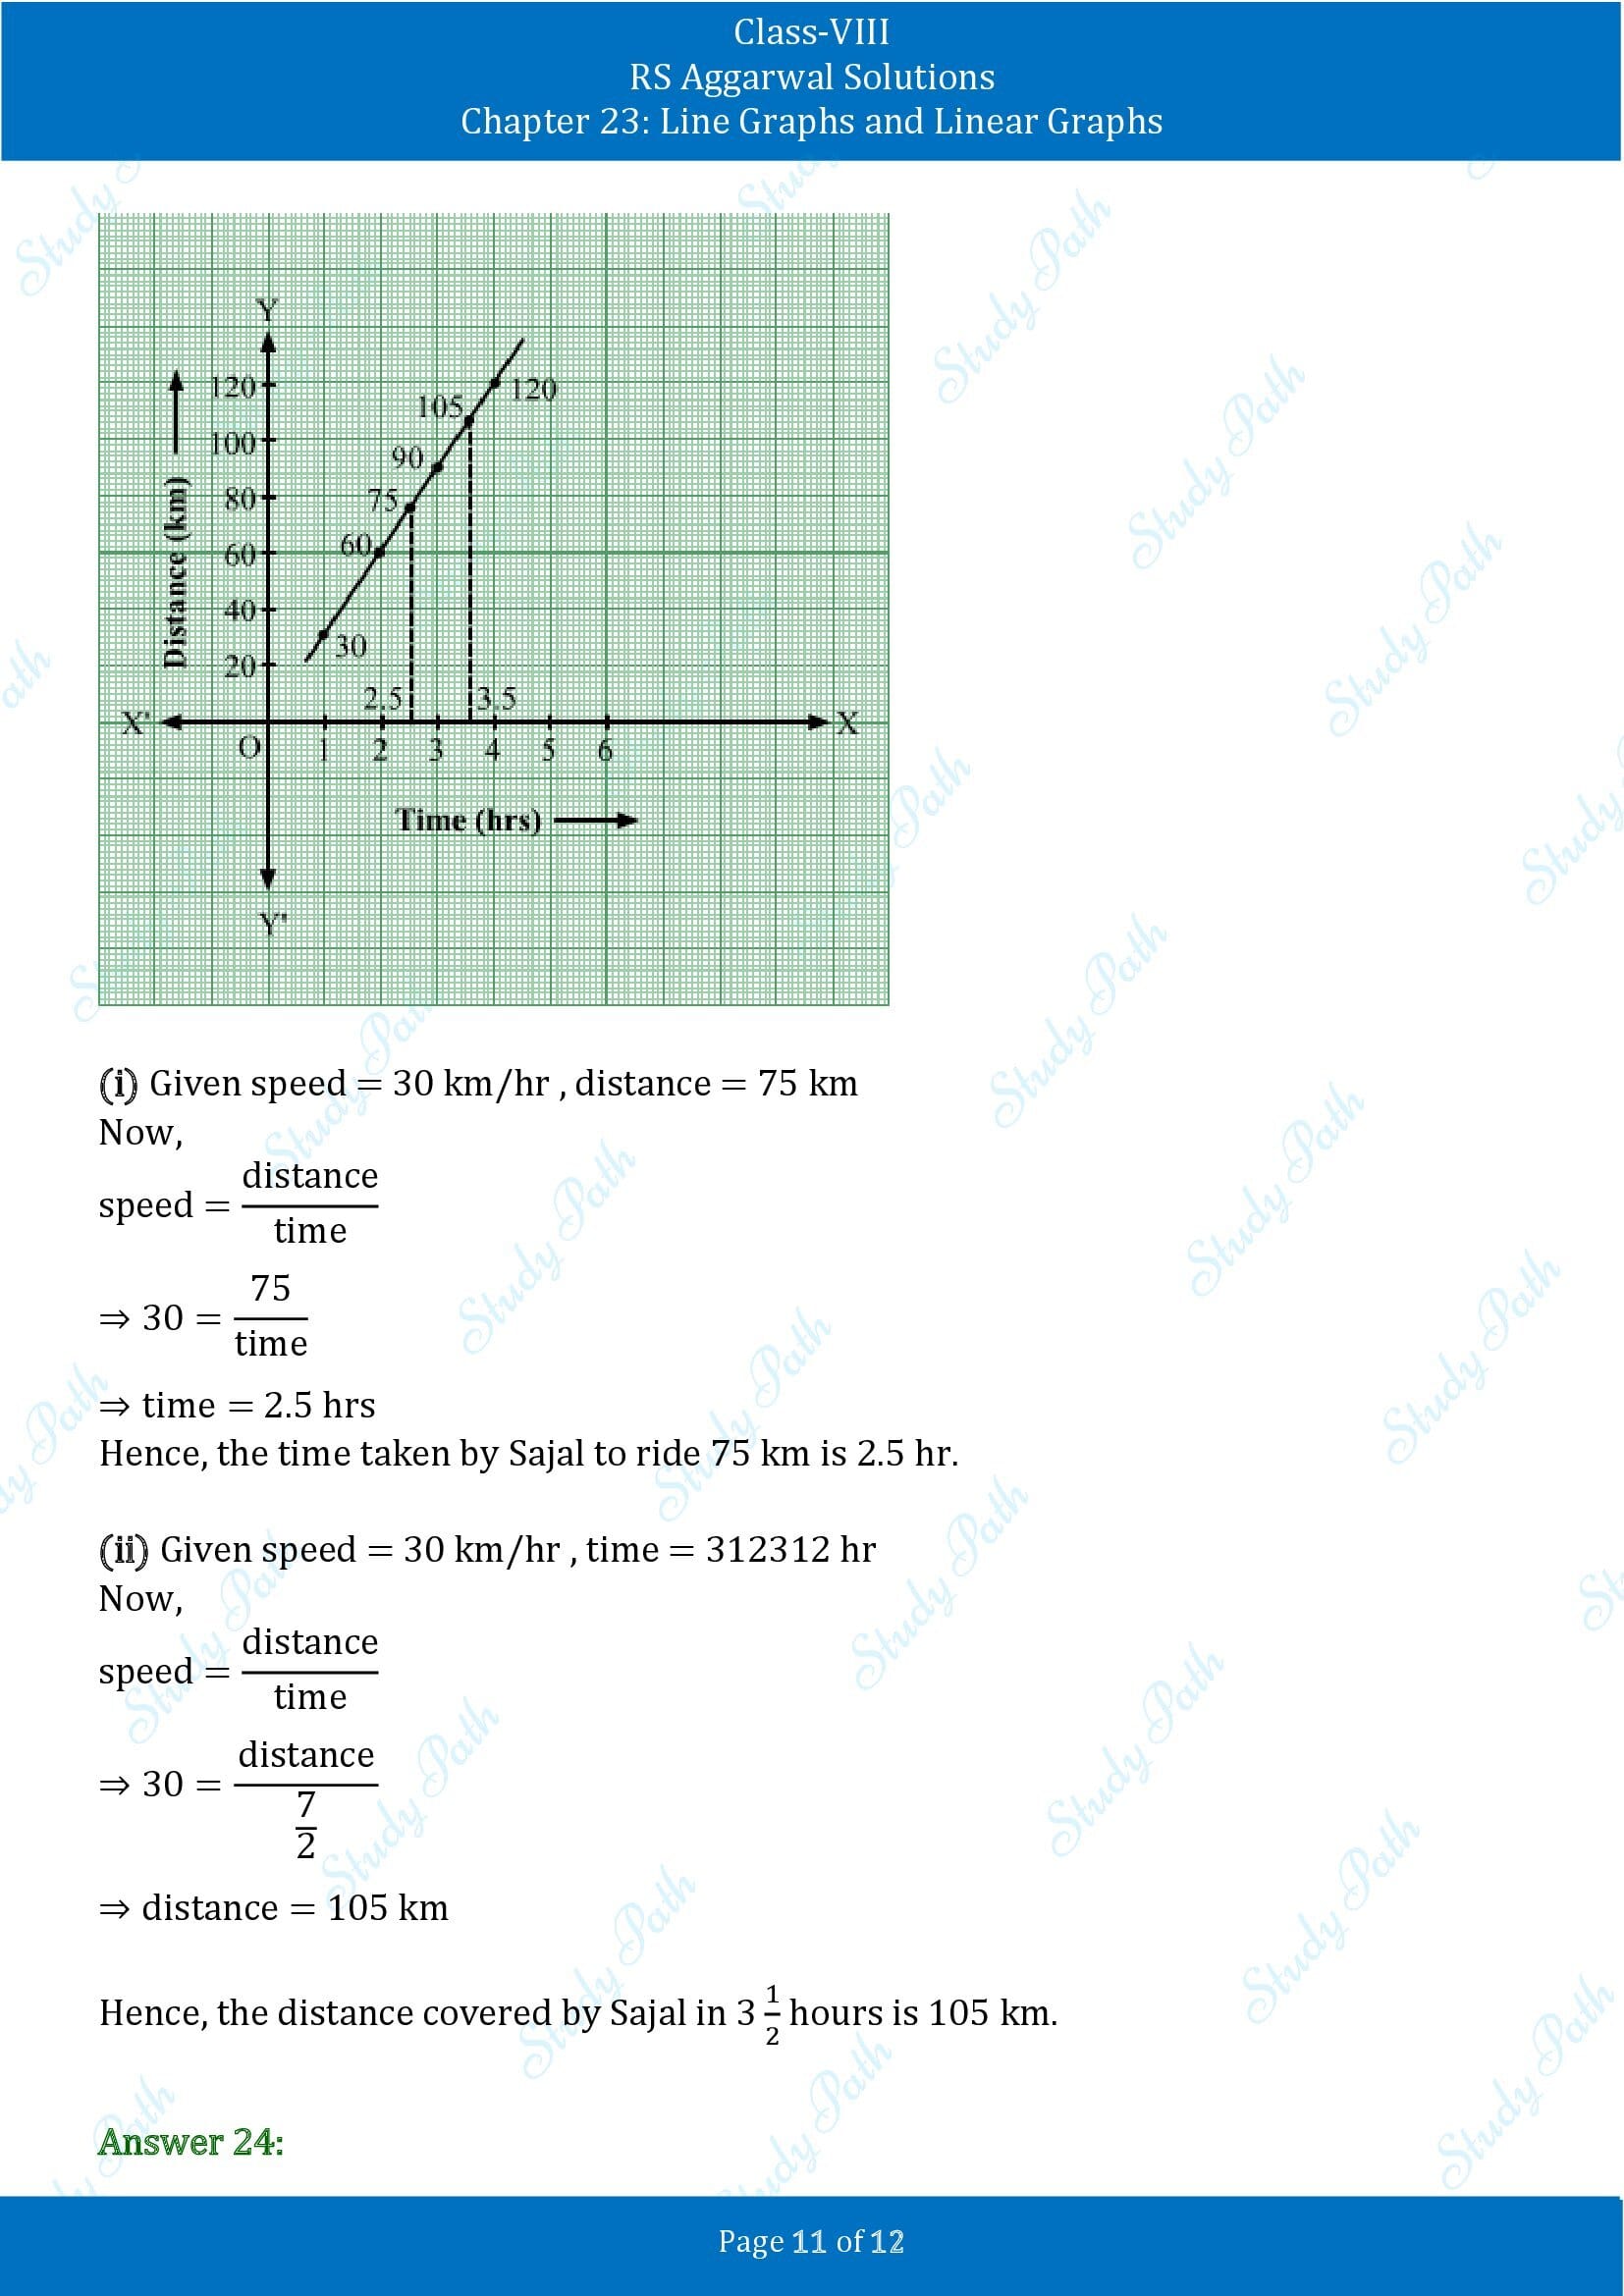 RS Aggarwal Solutions Class 8 Chapter 23 Line Graphs and Linear Graphs Exercise 23 00011